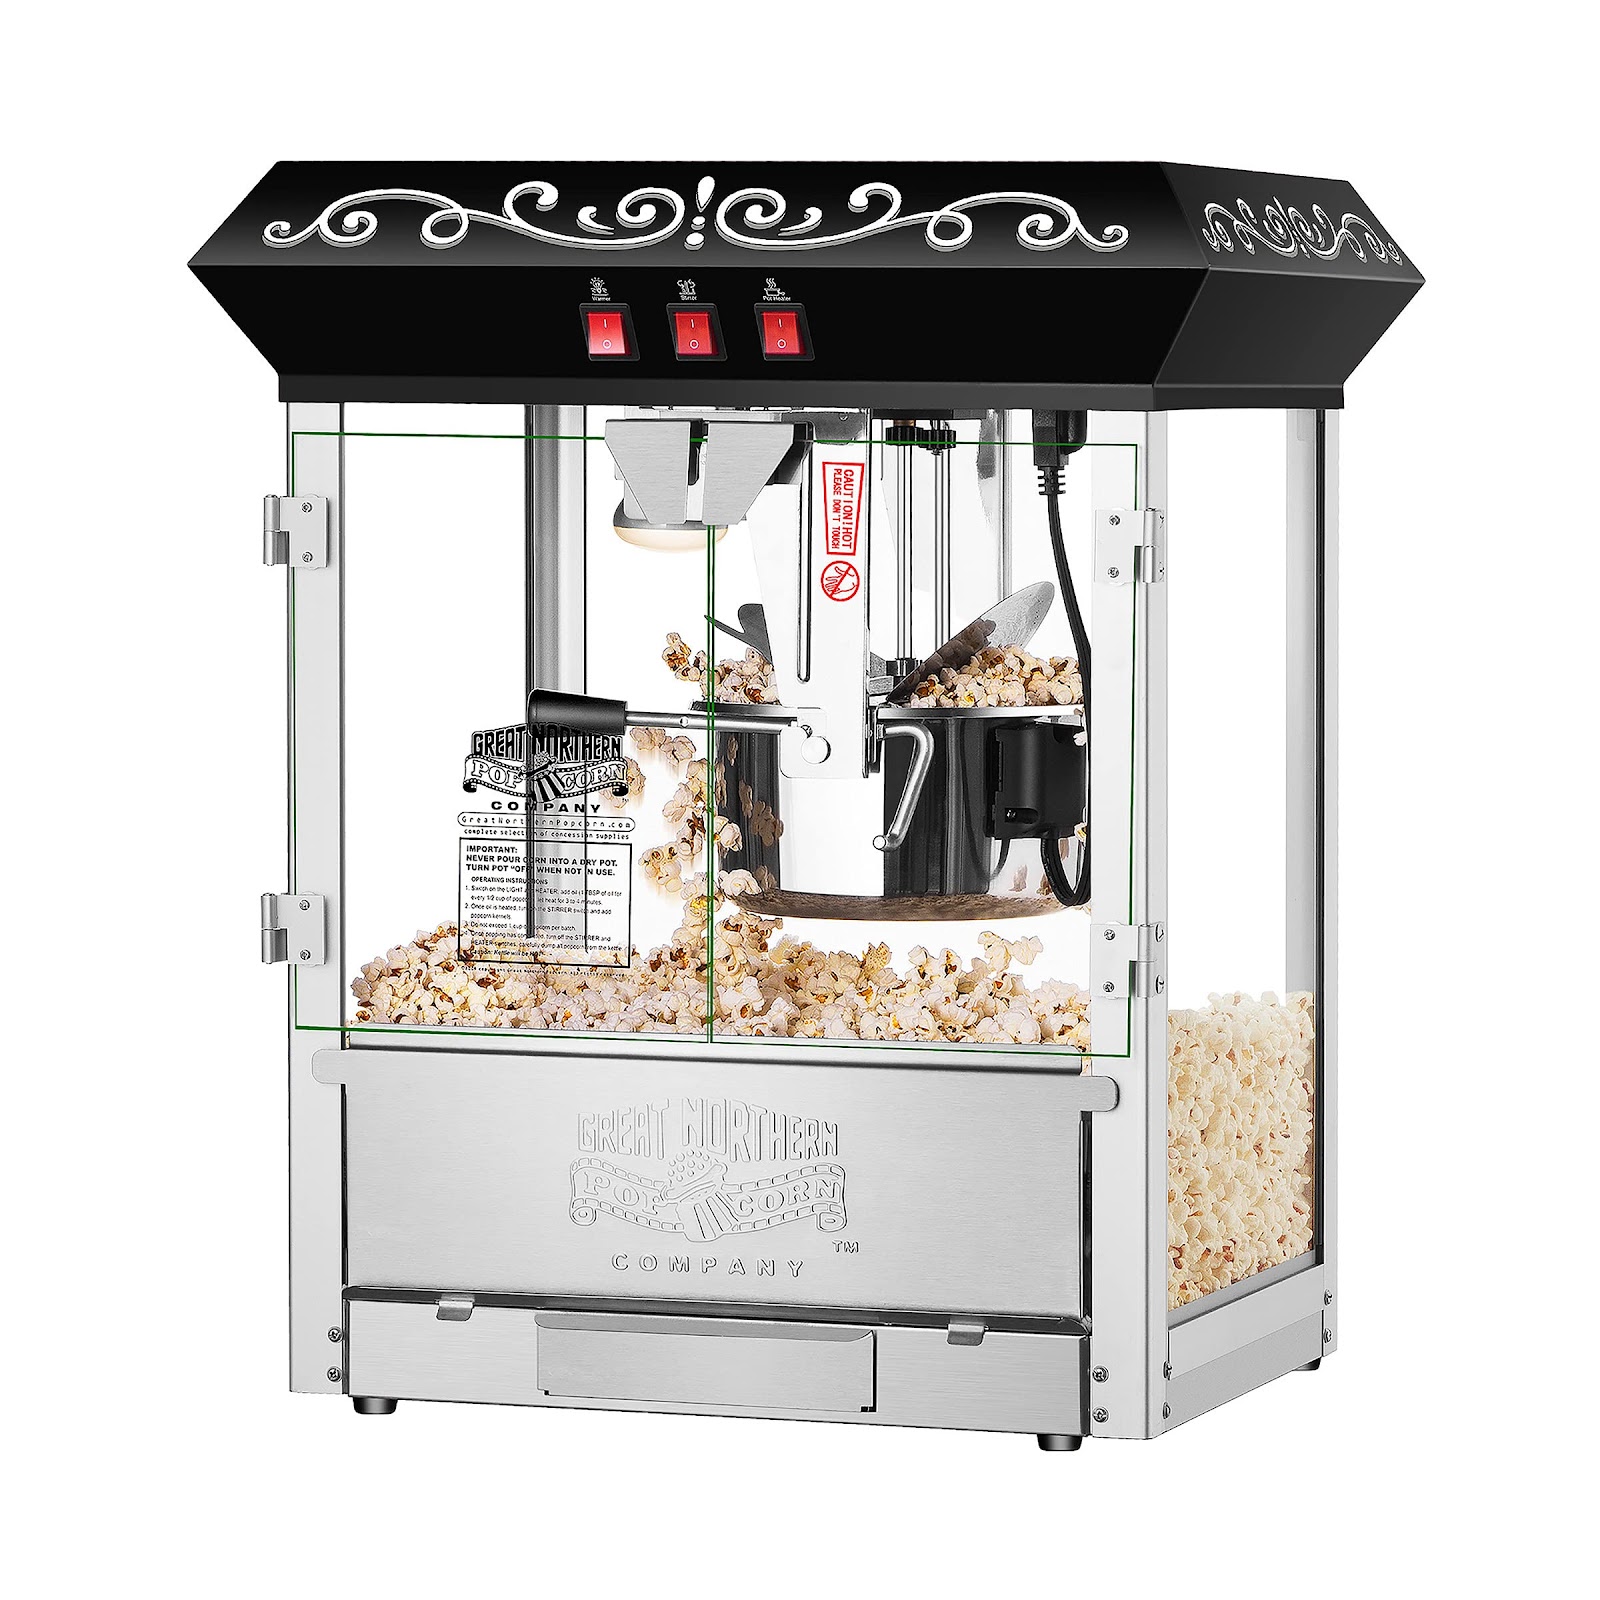 Nostalgia Vintage 8 Ounce Professional Popcorn Cart Makes Up to 32 Cups,  Three Storage Candy & Kernel Dispenser Also for Nuts, Chocolate, Measuring